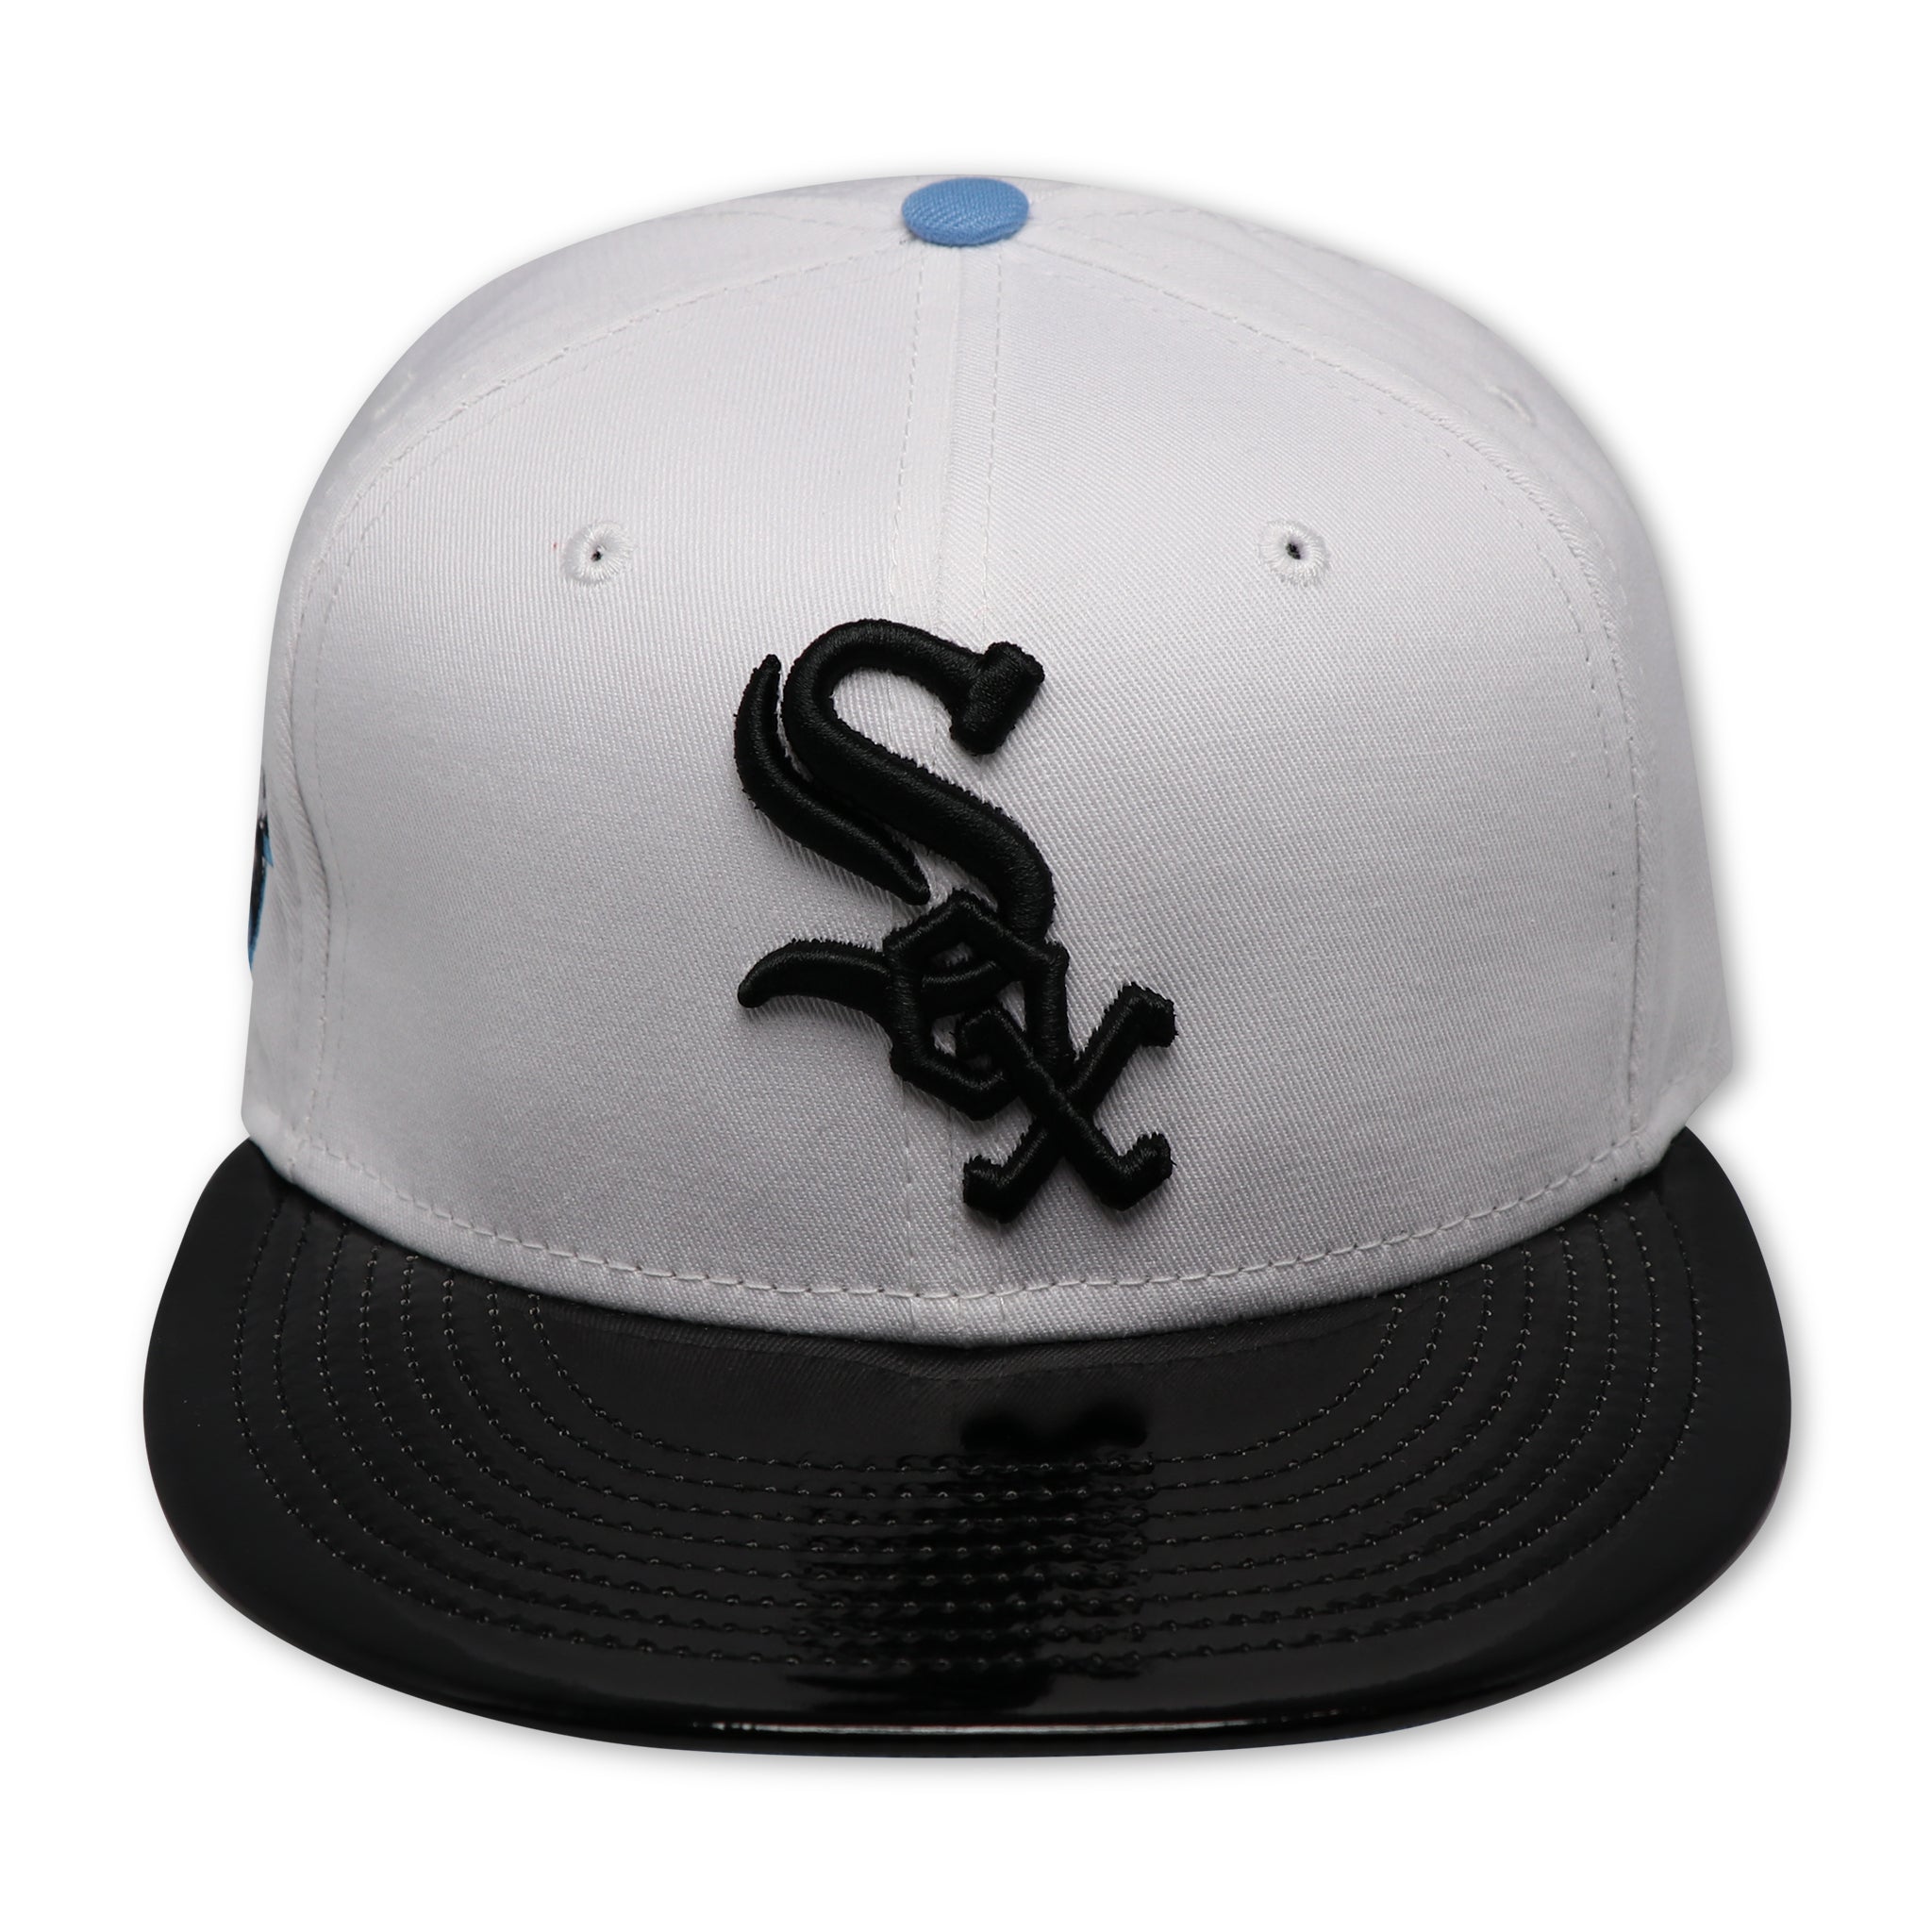 CHICAGO WHITESOX (WHITE) (PATENT LEATHER BRIM) (COMISKEY PARK) NEW ERA 59FIFTY FITTED (SKY BLUE UNDER VISOR) (S)